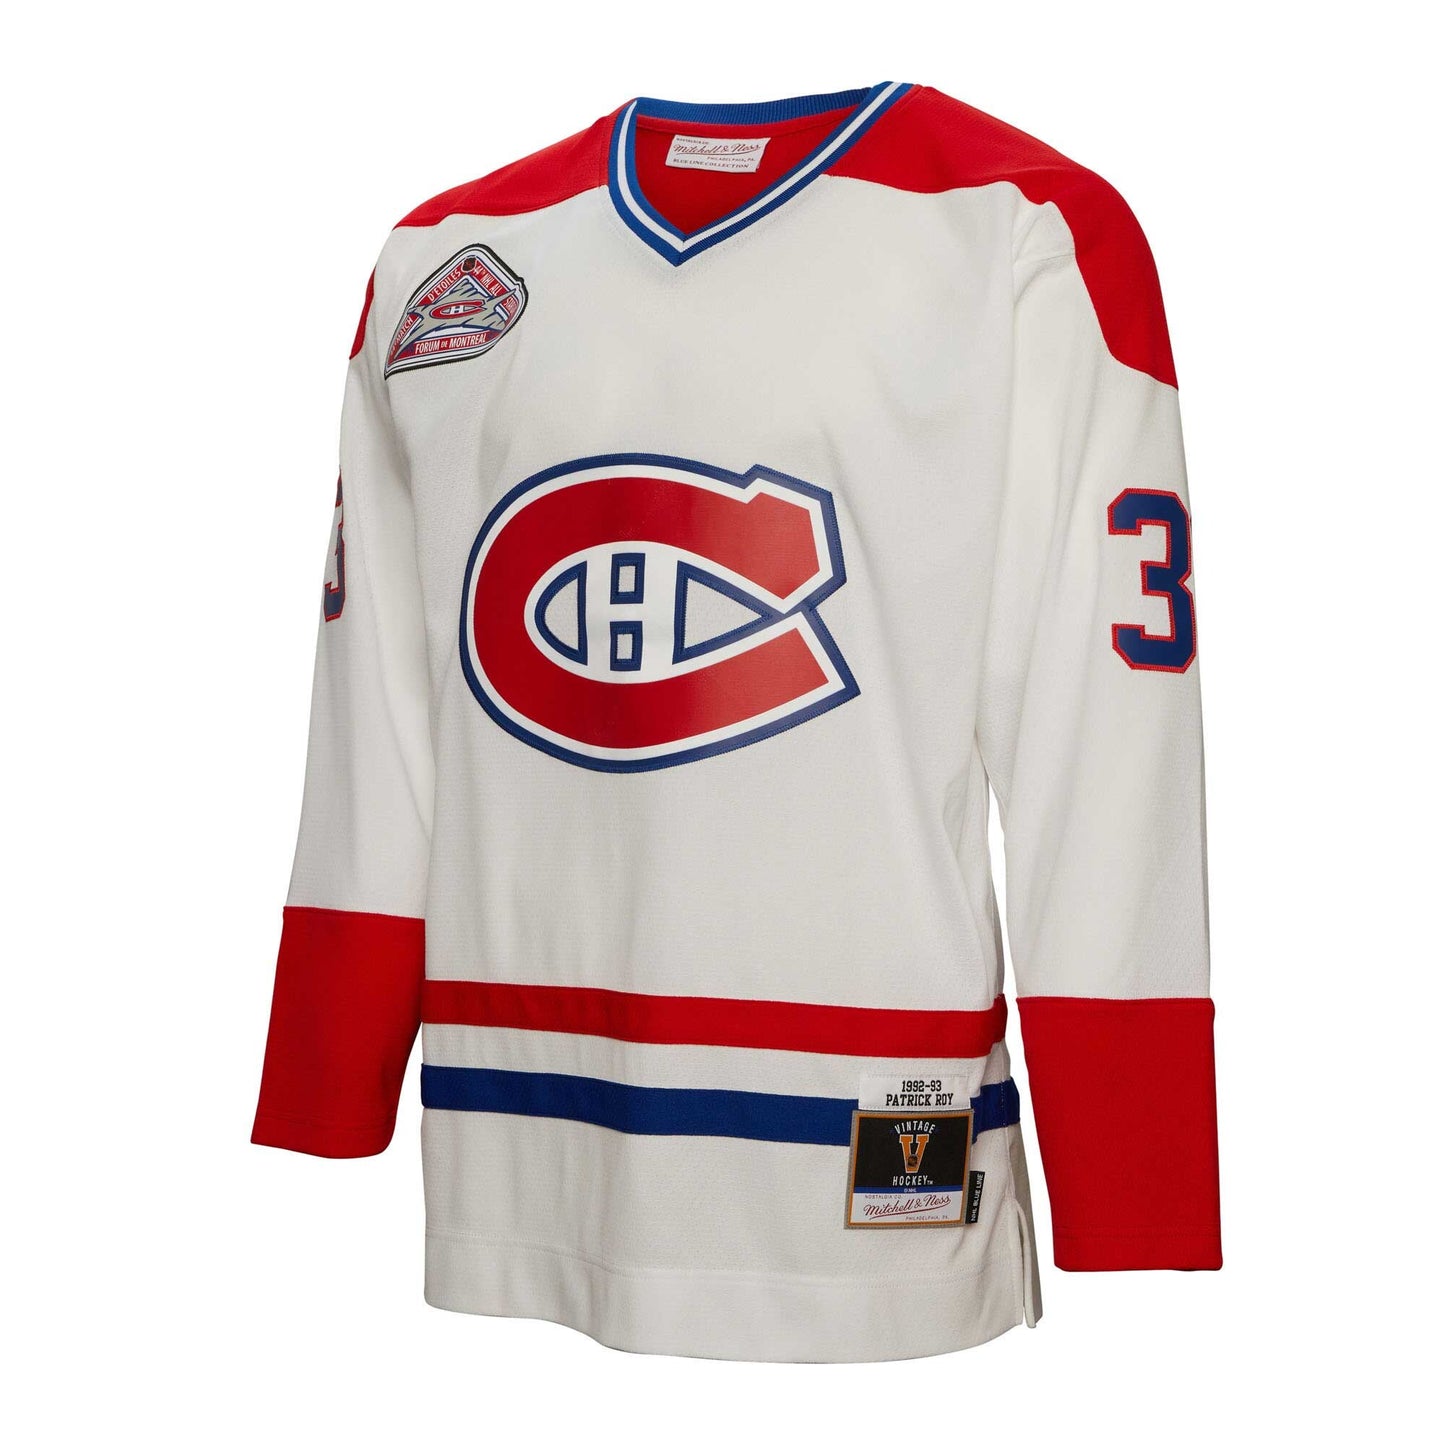 Men's Montreal Canadiens Patrick Roy Mitchell & Ness White 1992/93 Blue Line Player Jersey